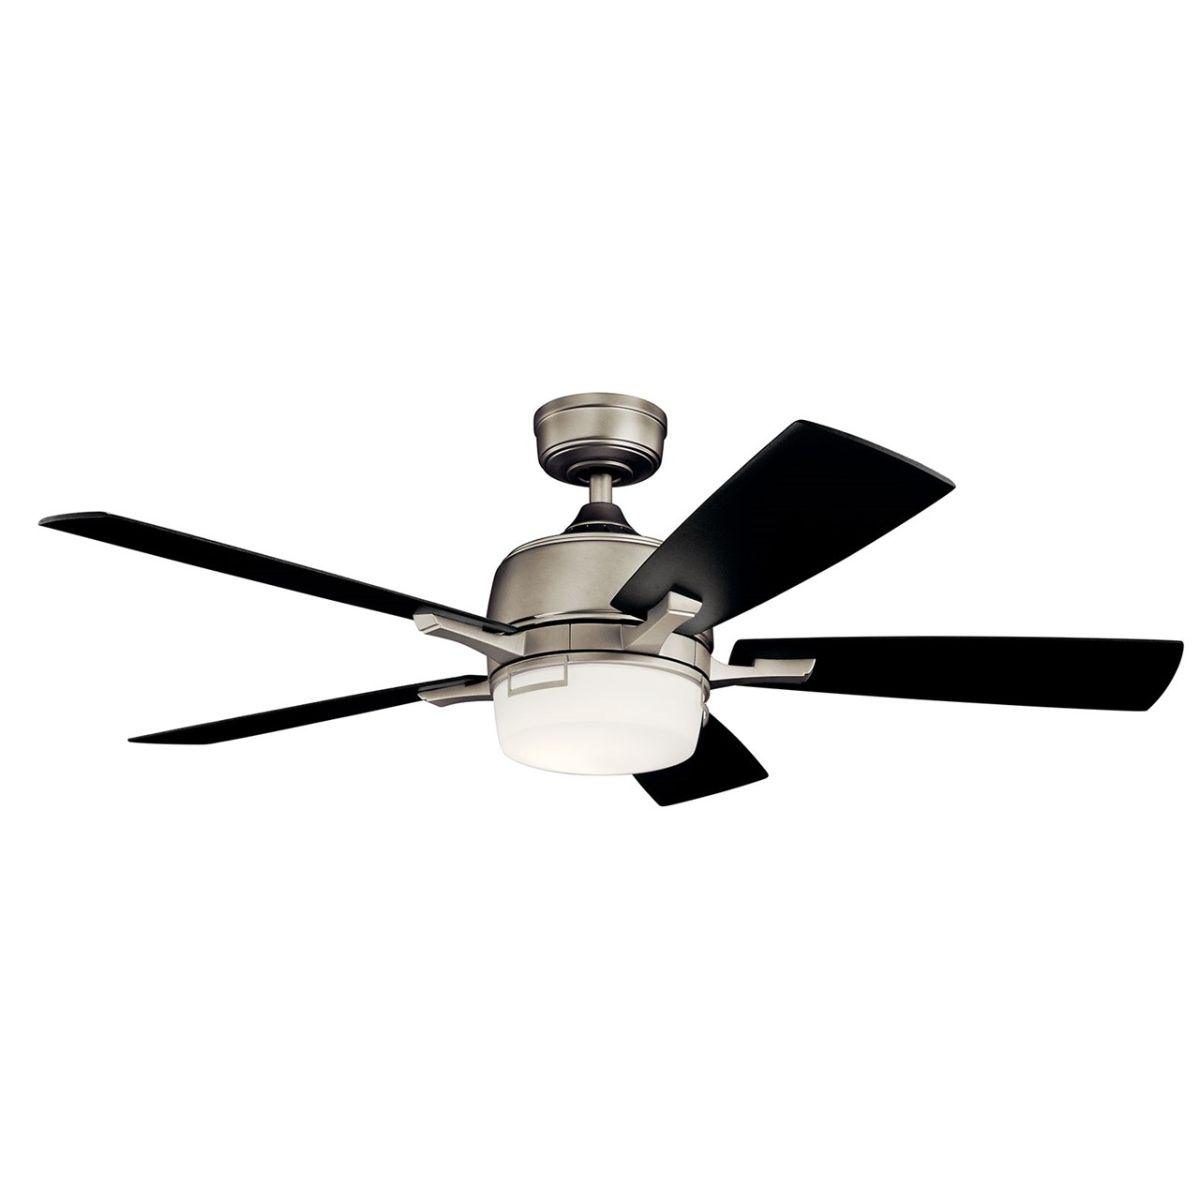 Leeds 52 Inch Ceiling Fan With Light, Wall Control Included - Bees Lighting